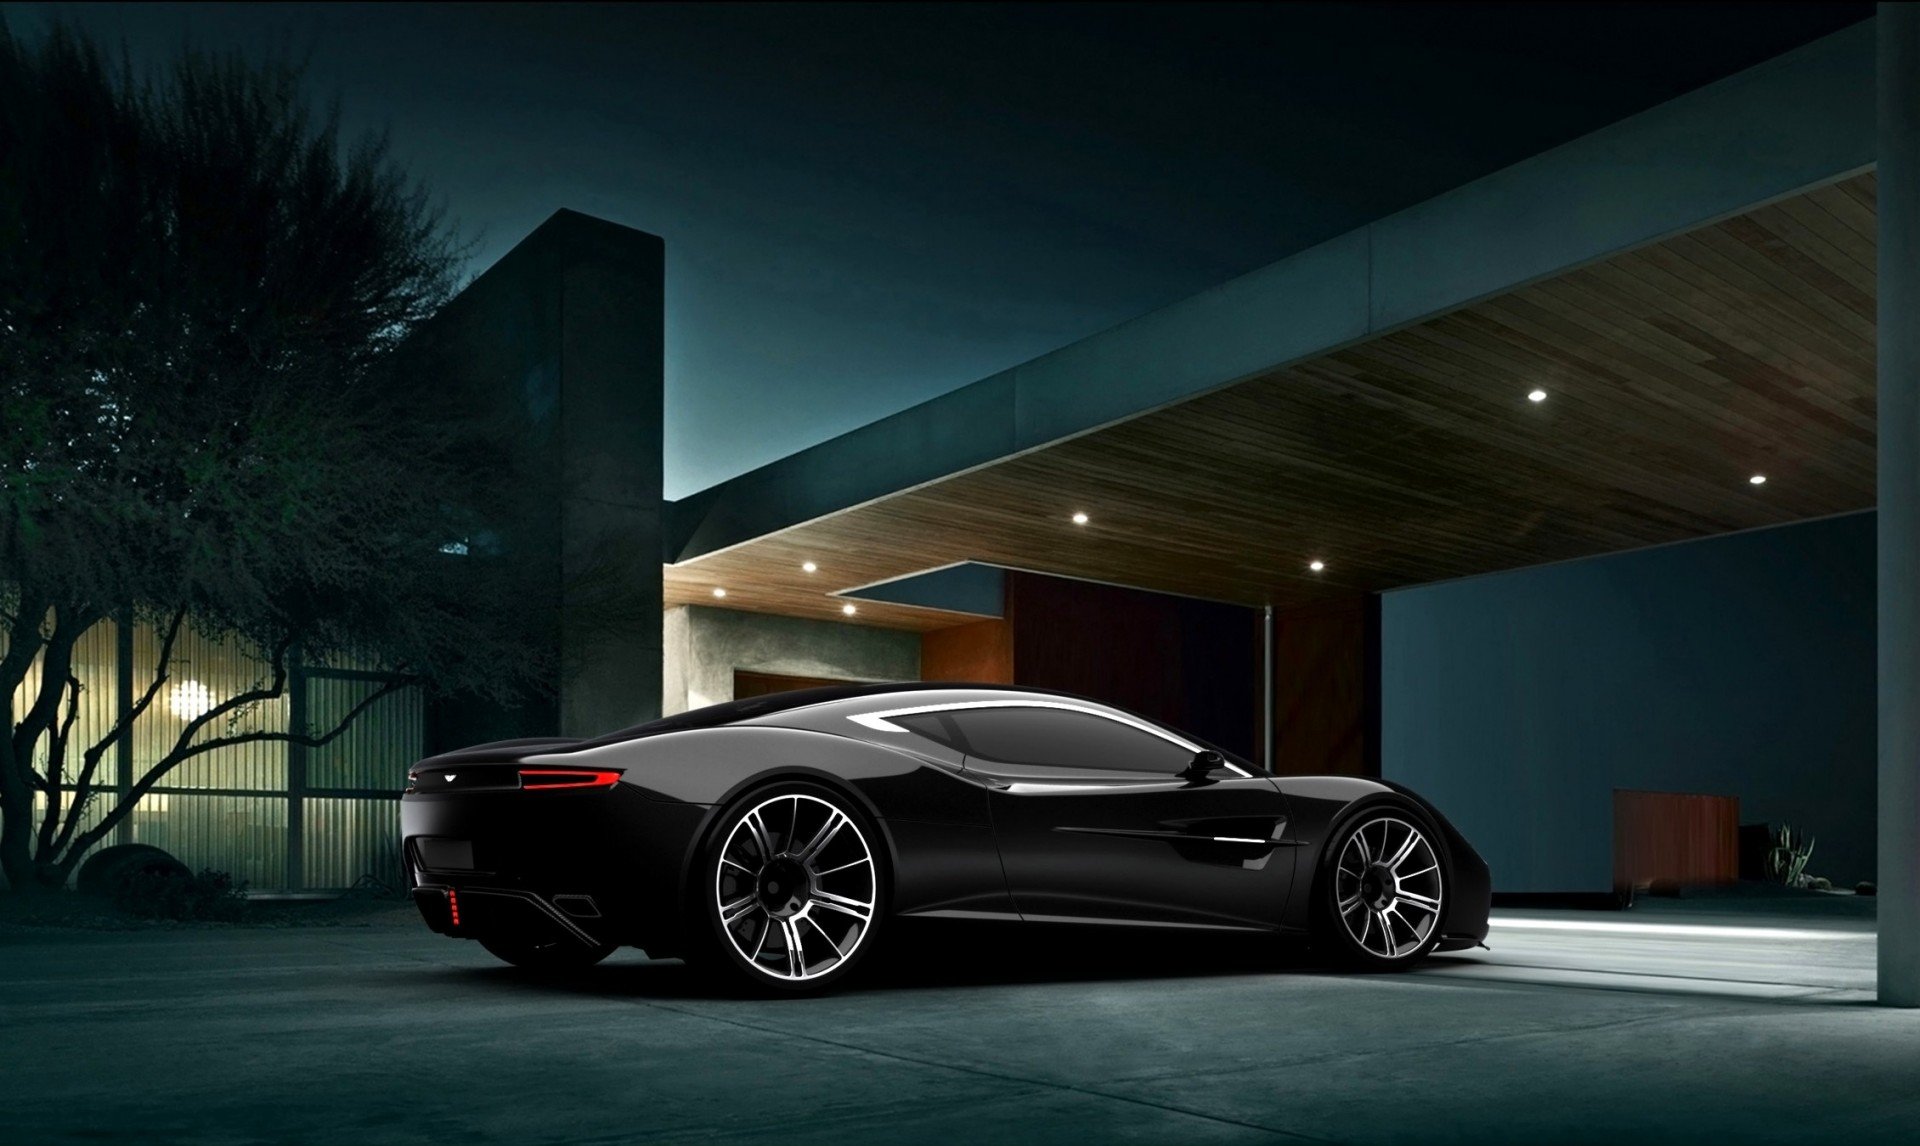 Life Vehicles Night Car House Resources Light Luxury Will Be Rich Quotes 1920x1146 Wallpaper Teahub Io Rich life wallpaper hd | luxury homes, house, architecture. life vehicles night car house resources